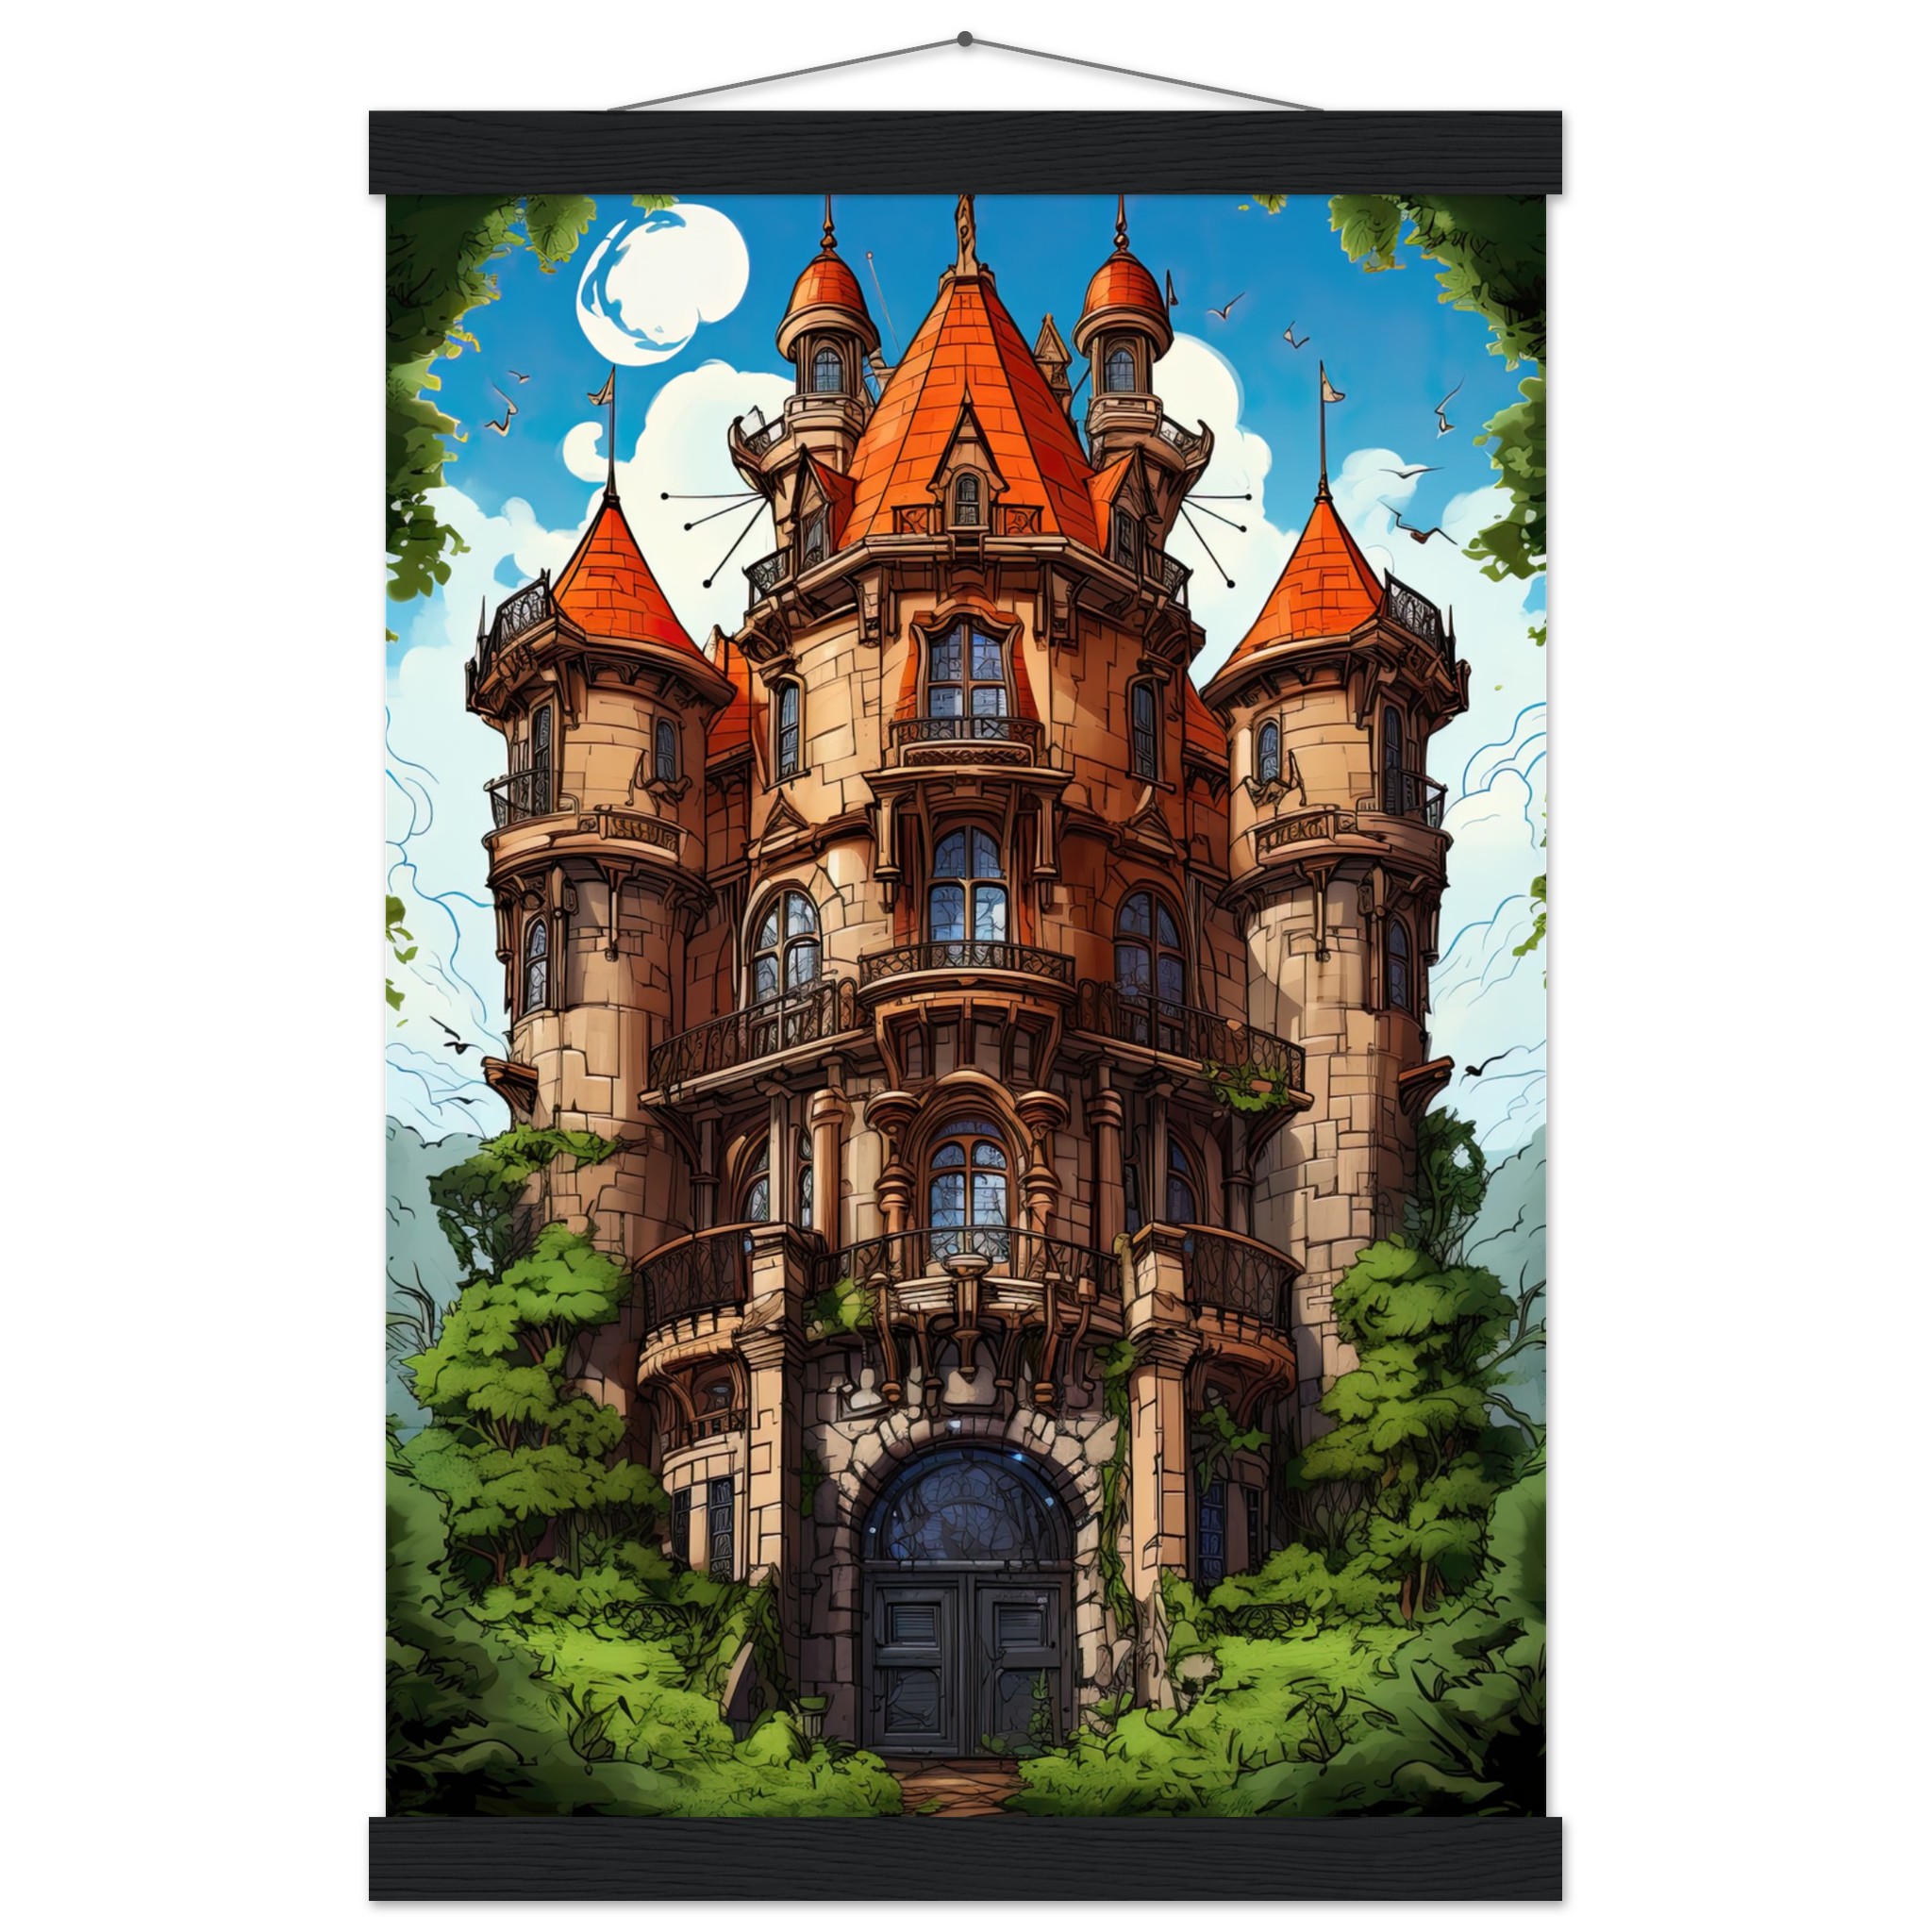 Chateau in the Woods Hanging Print - 30x45 cm / 12x18″, Black wall hanger